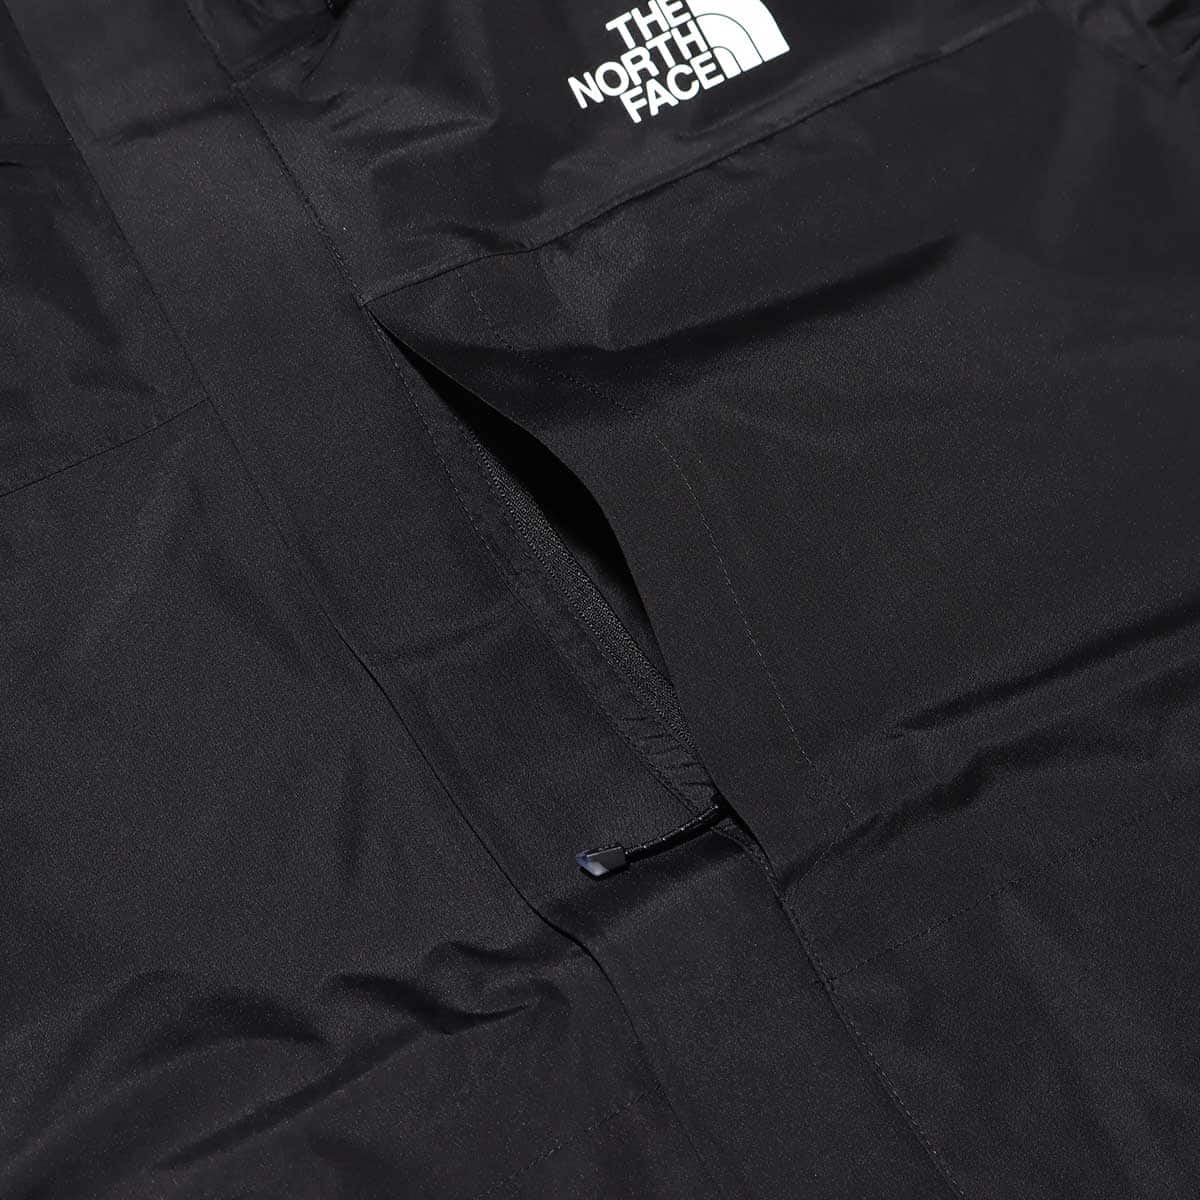 THE NORTH FACE CLOUD JACKET BLACK 23SS-I